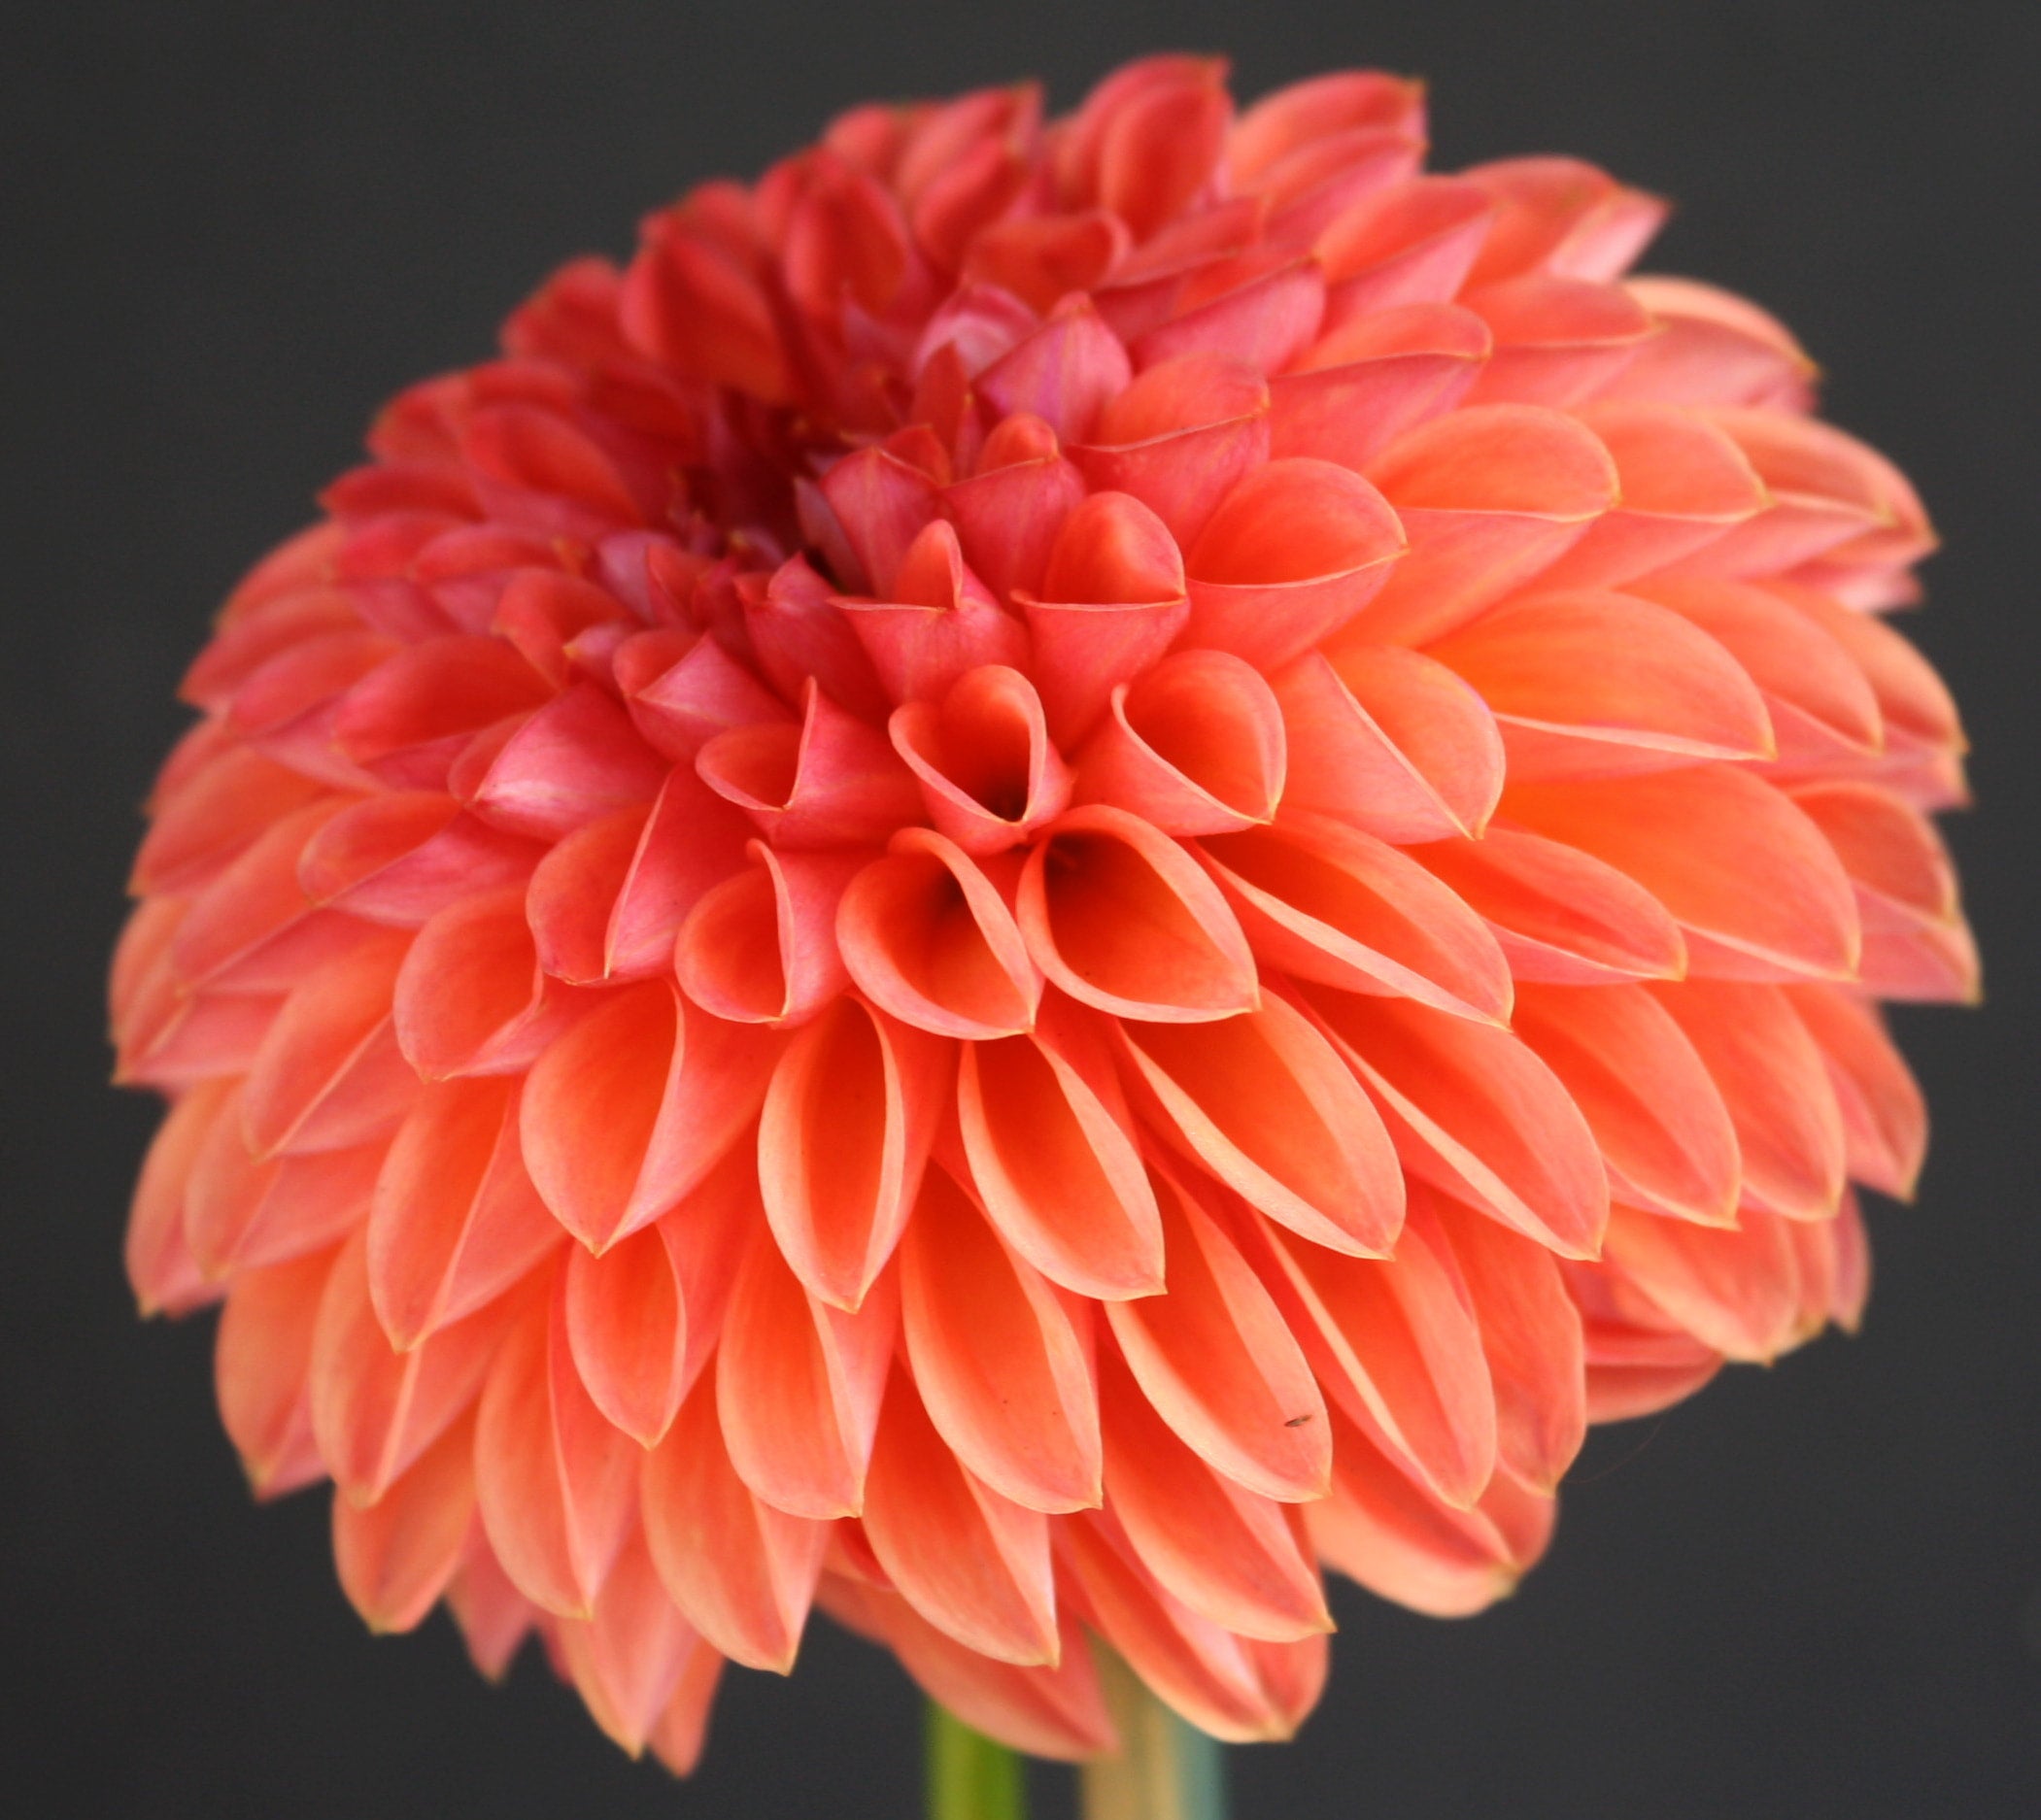 Chimacum Sam Delightful Dahlias Closed To Prepare For Order Fulfillment Shipping To Begin In